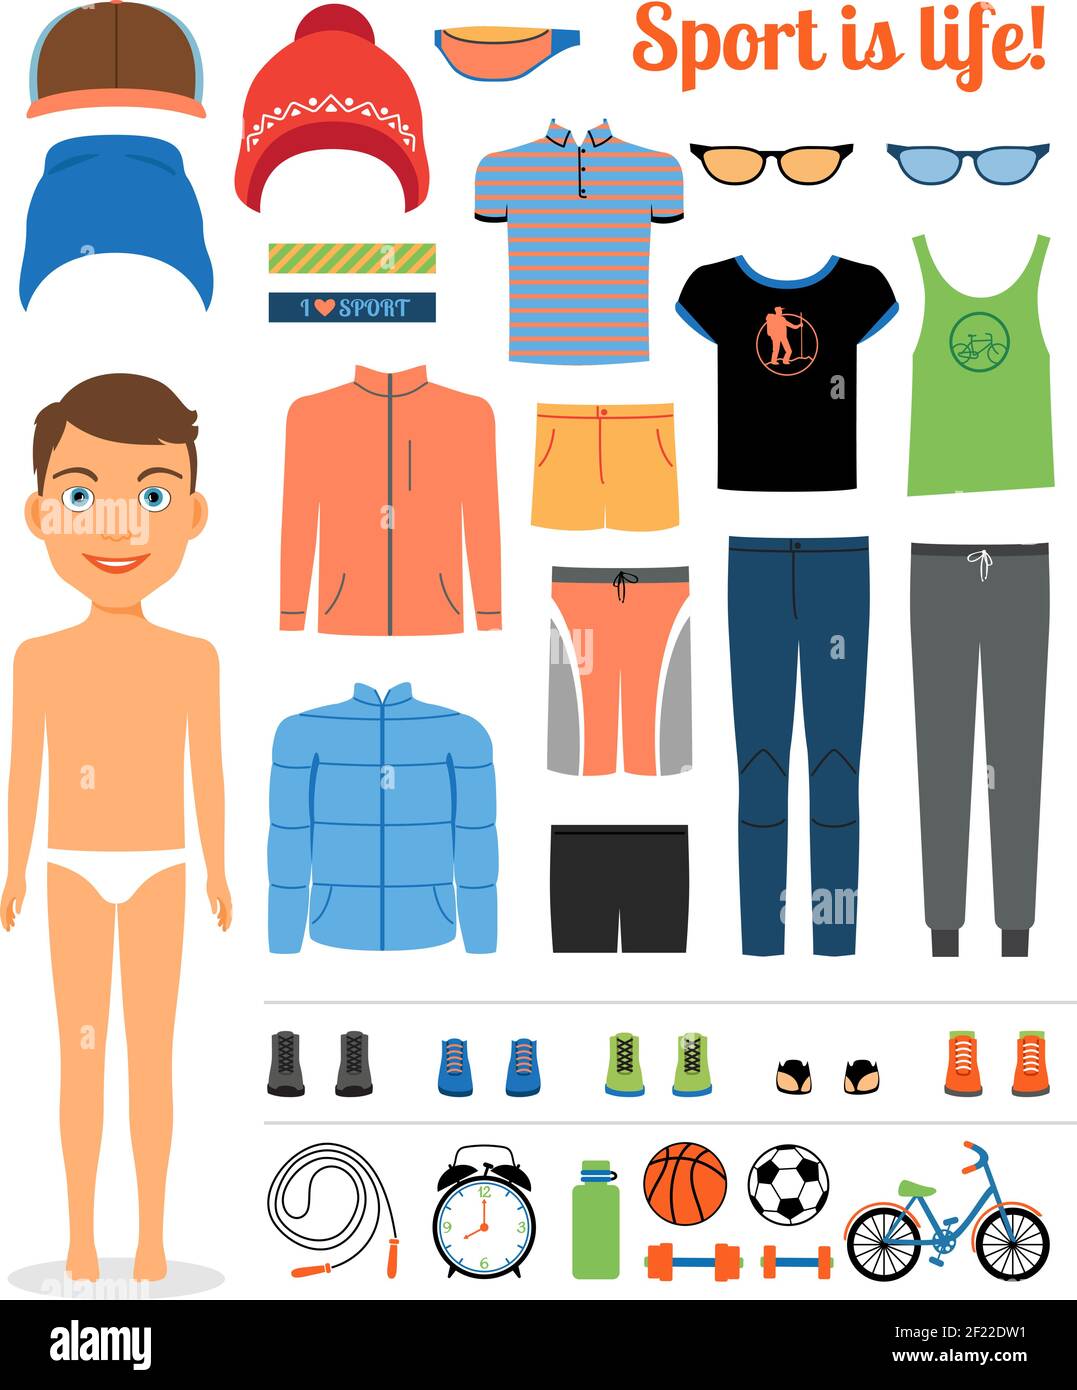 Sport boy. Clothing and sports equipment for fitness. Sportswear, hat, jacket. Vector illustration Stock Vector